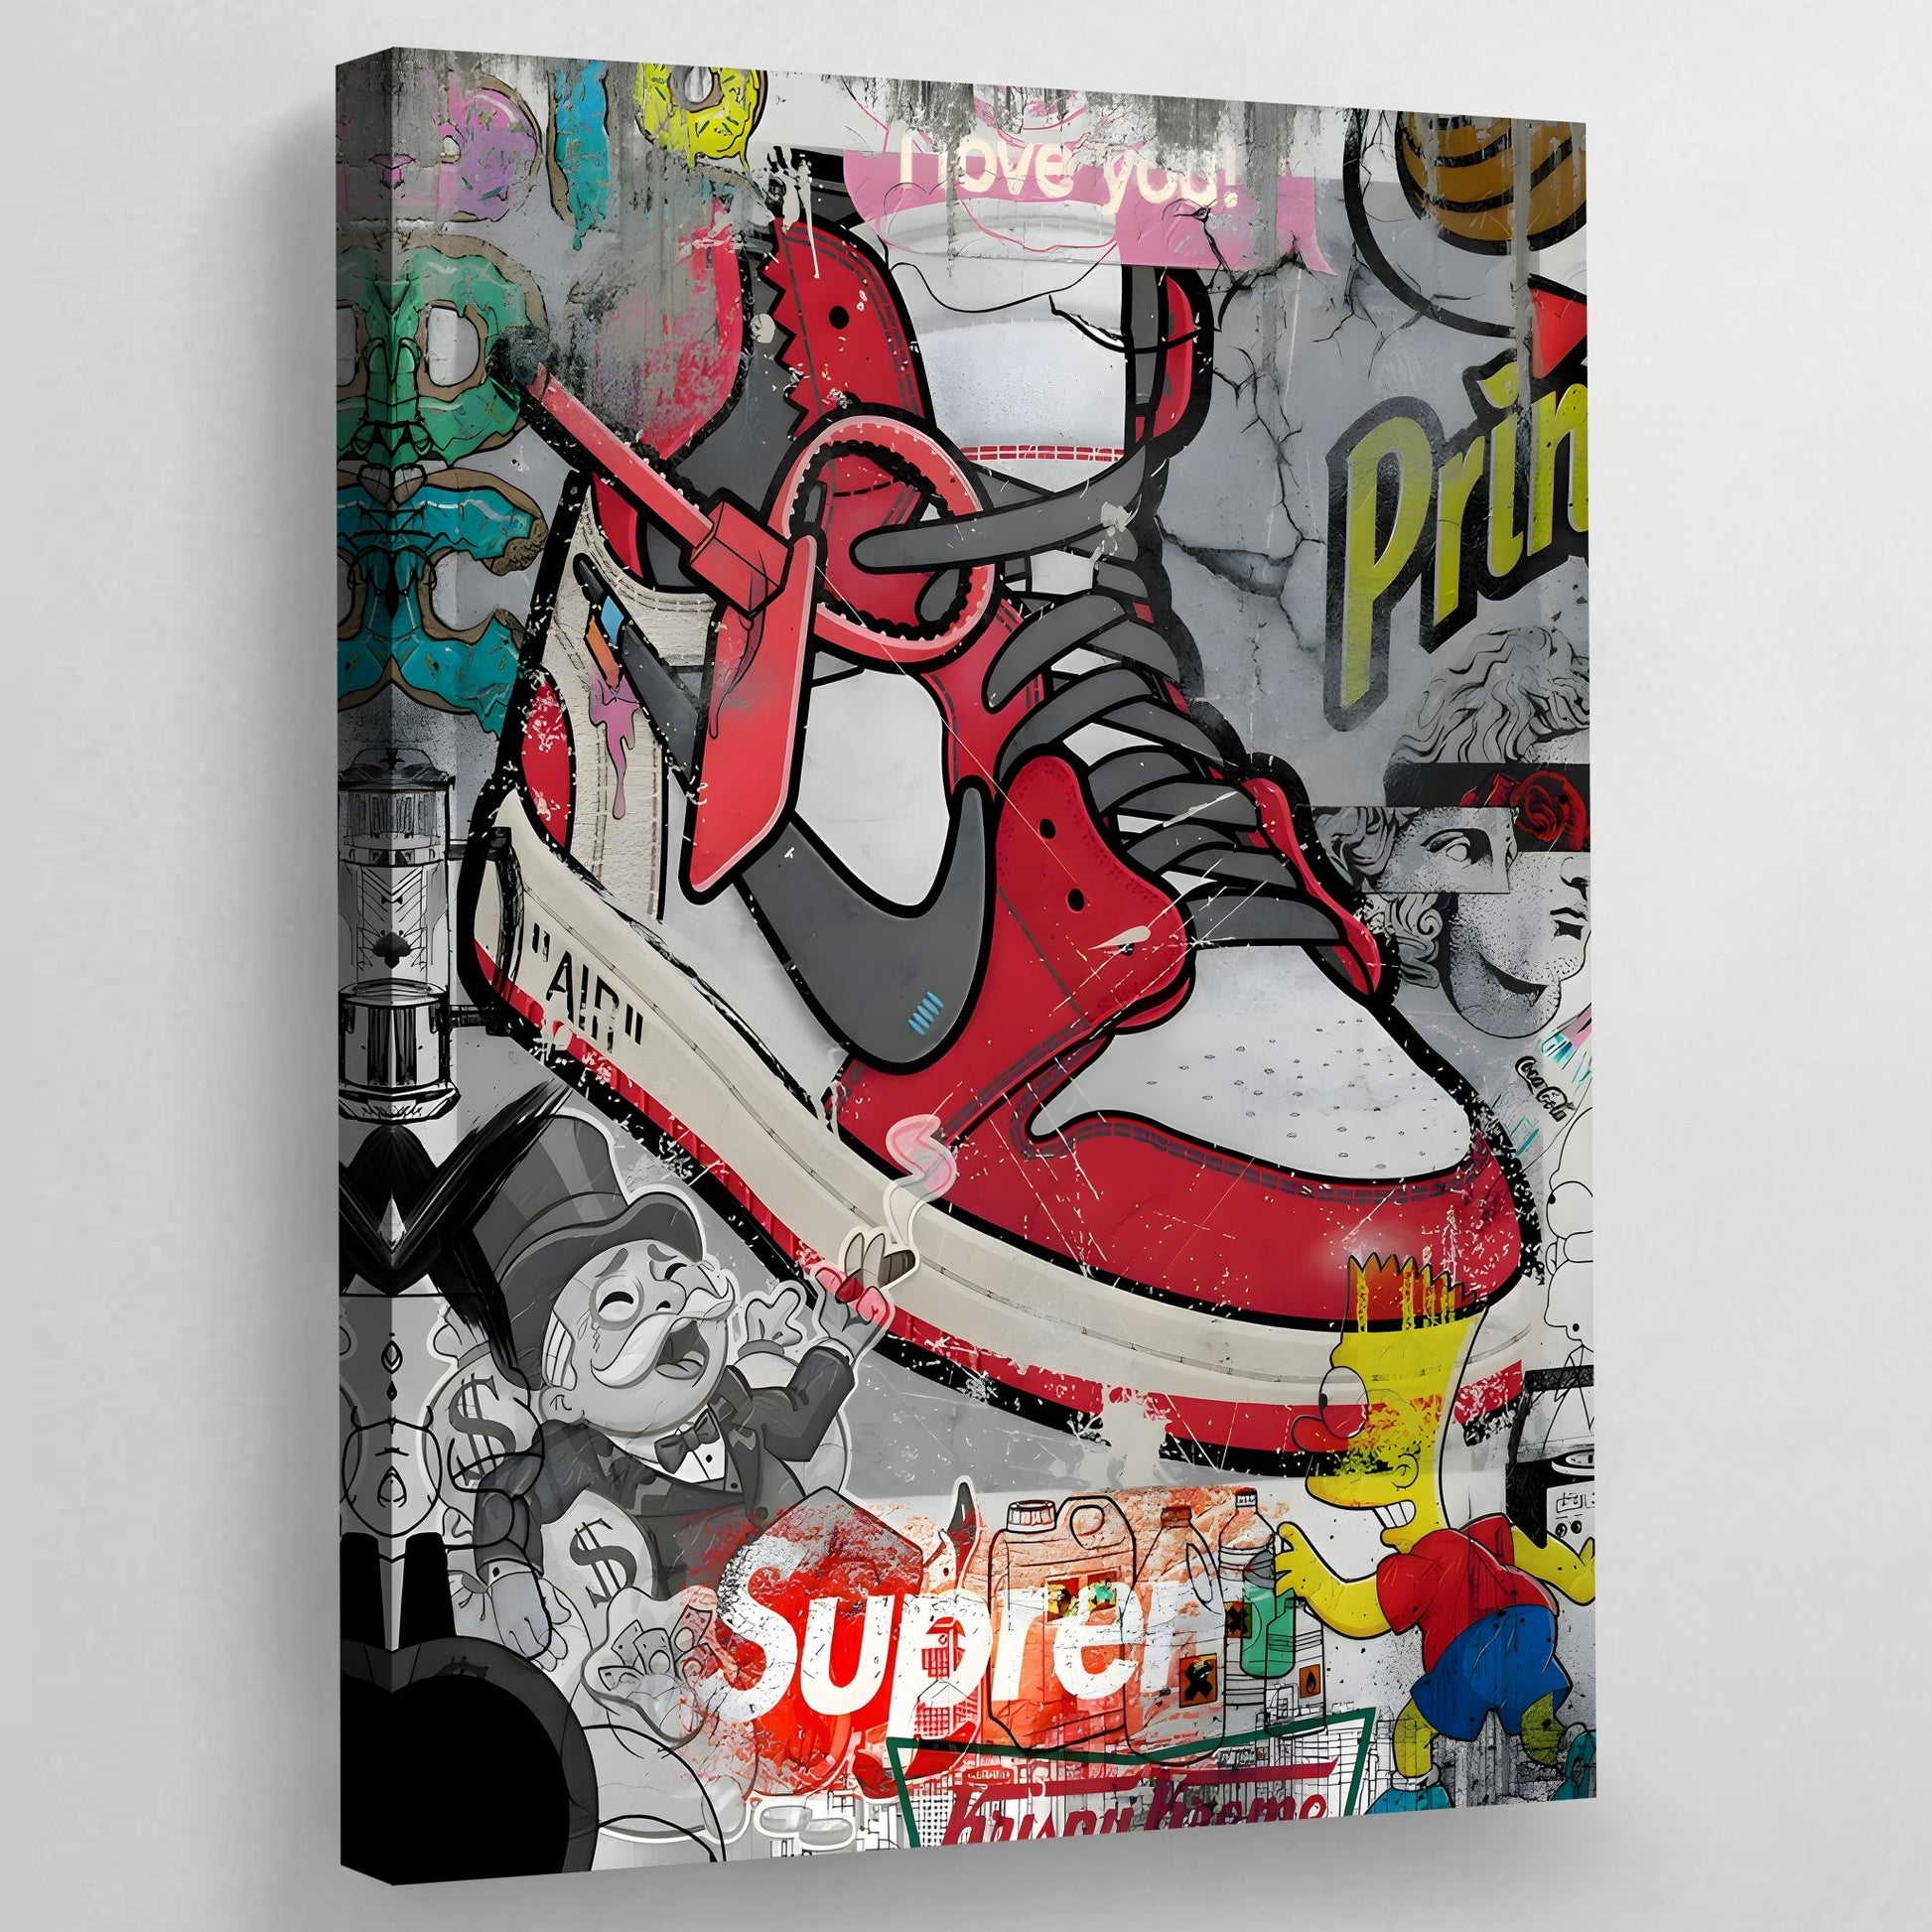 Page 2 Results for Sneaker Art: Wall Art & Canvas Prints